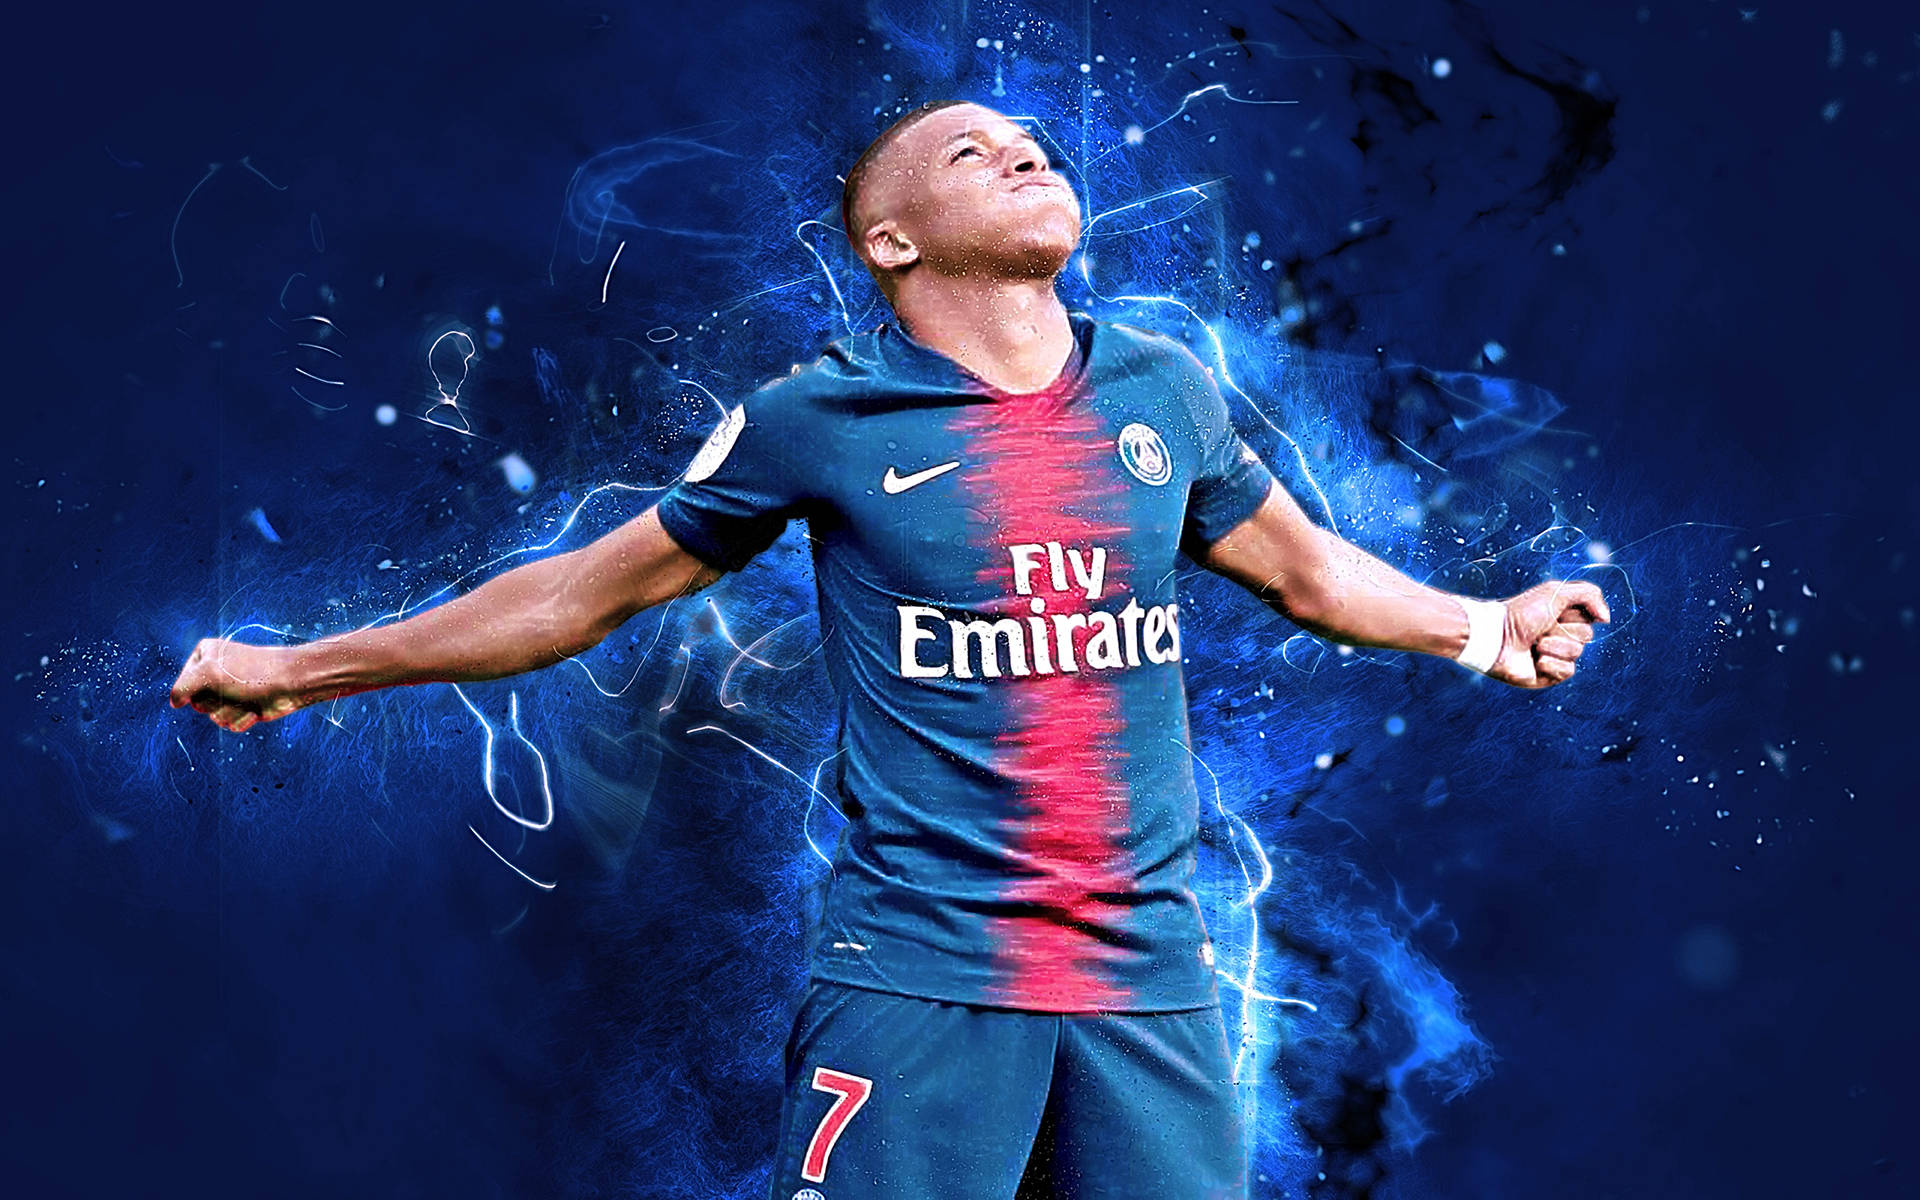 Kylian Mbappe Arms Wide In Blue Background